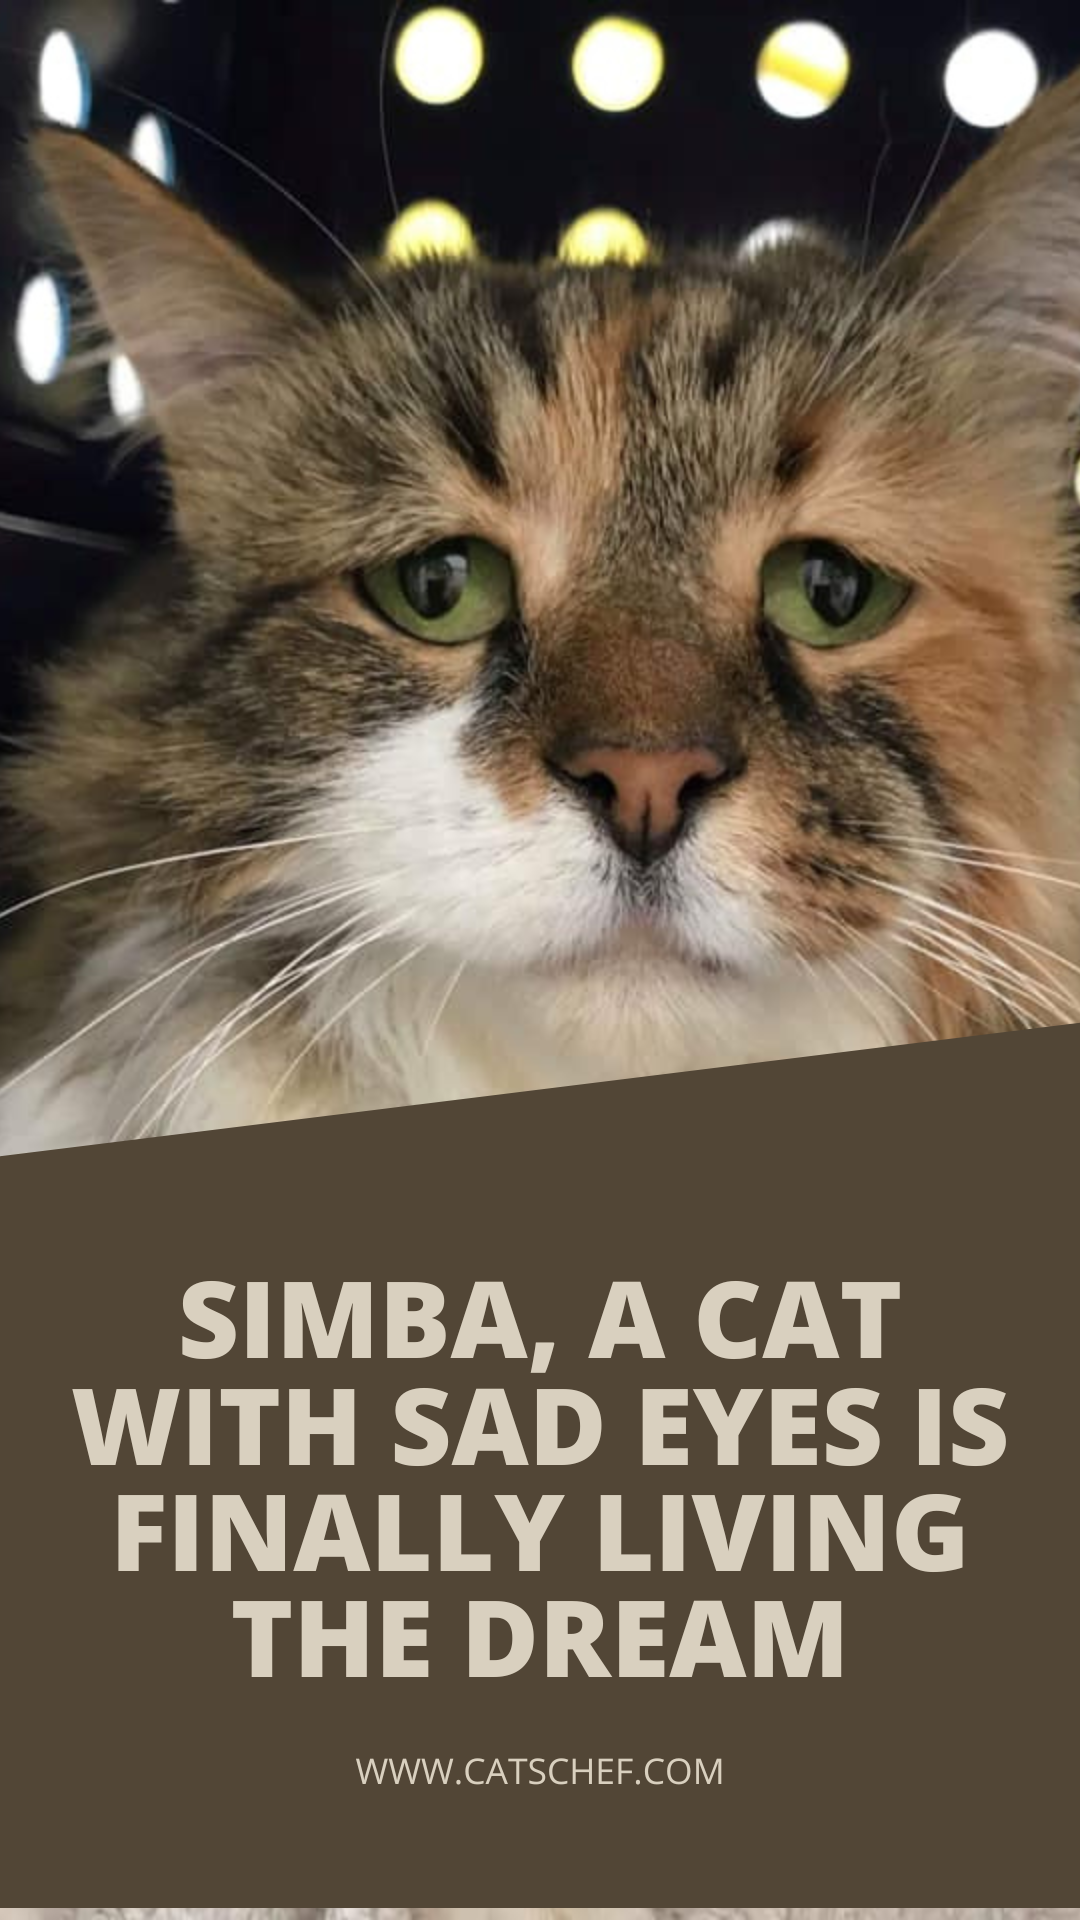 Simba, A Cat With Sad Eyes Is Finally Living The Dream